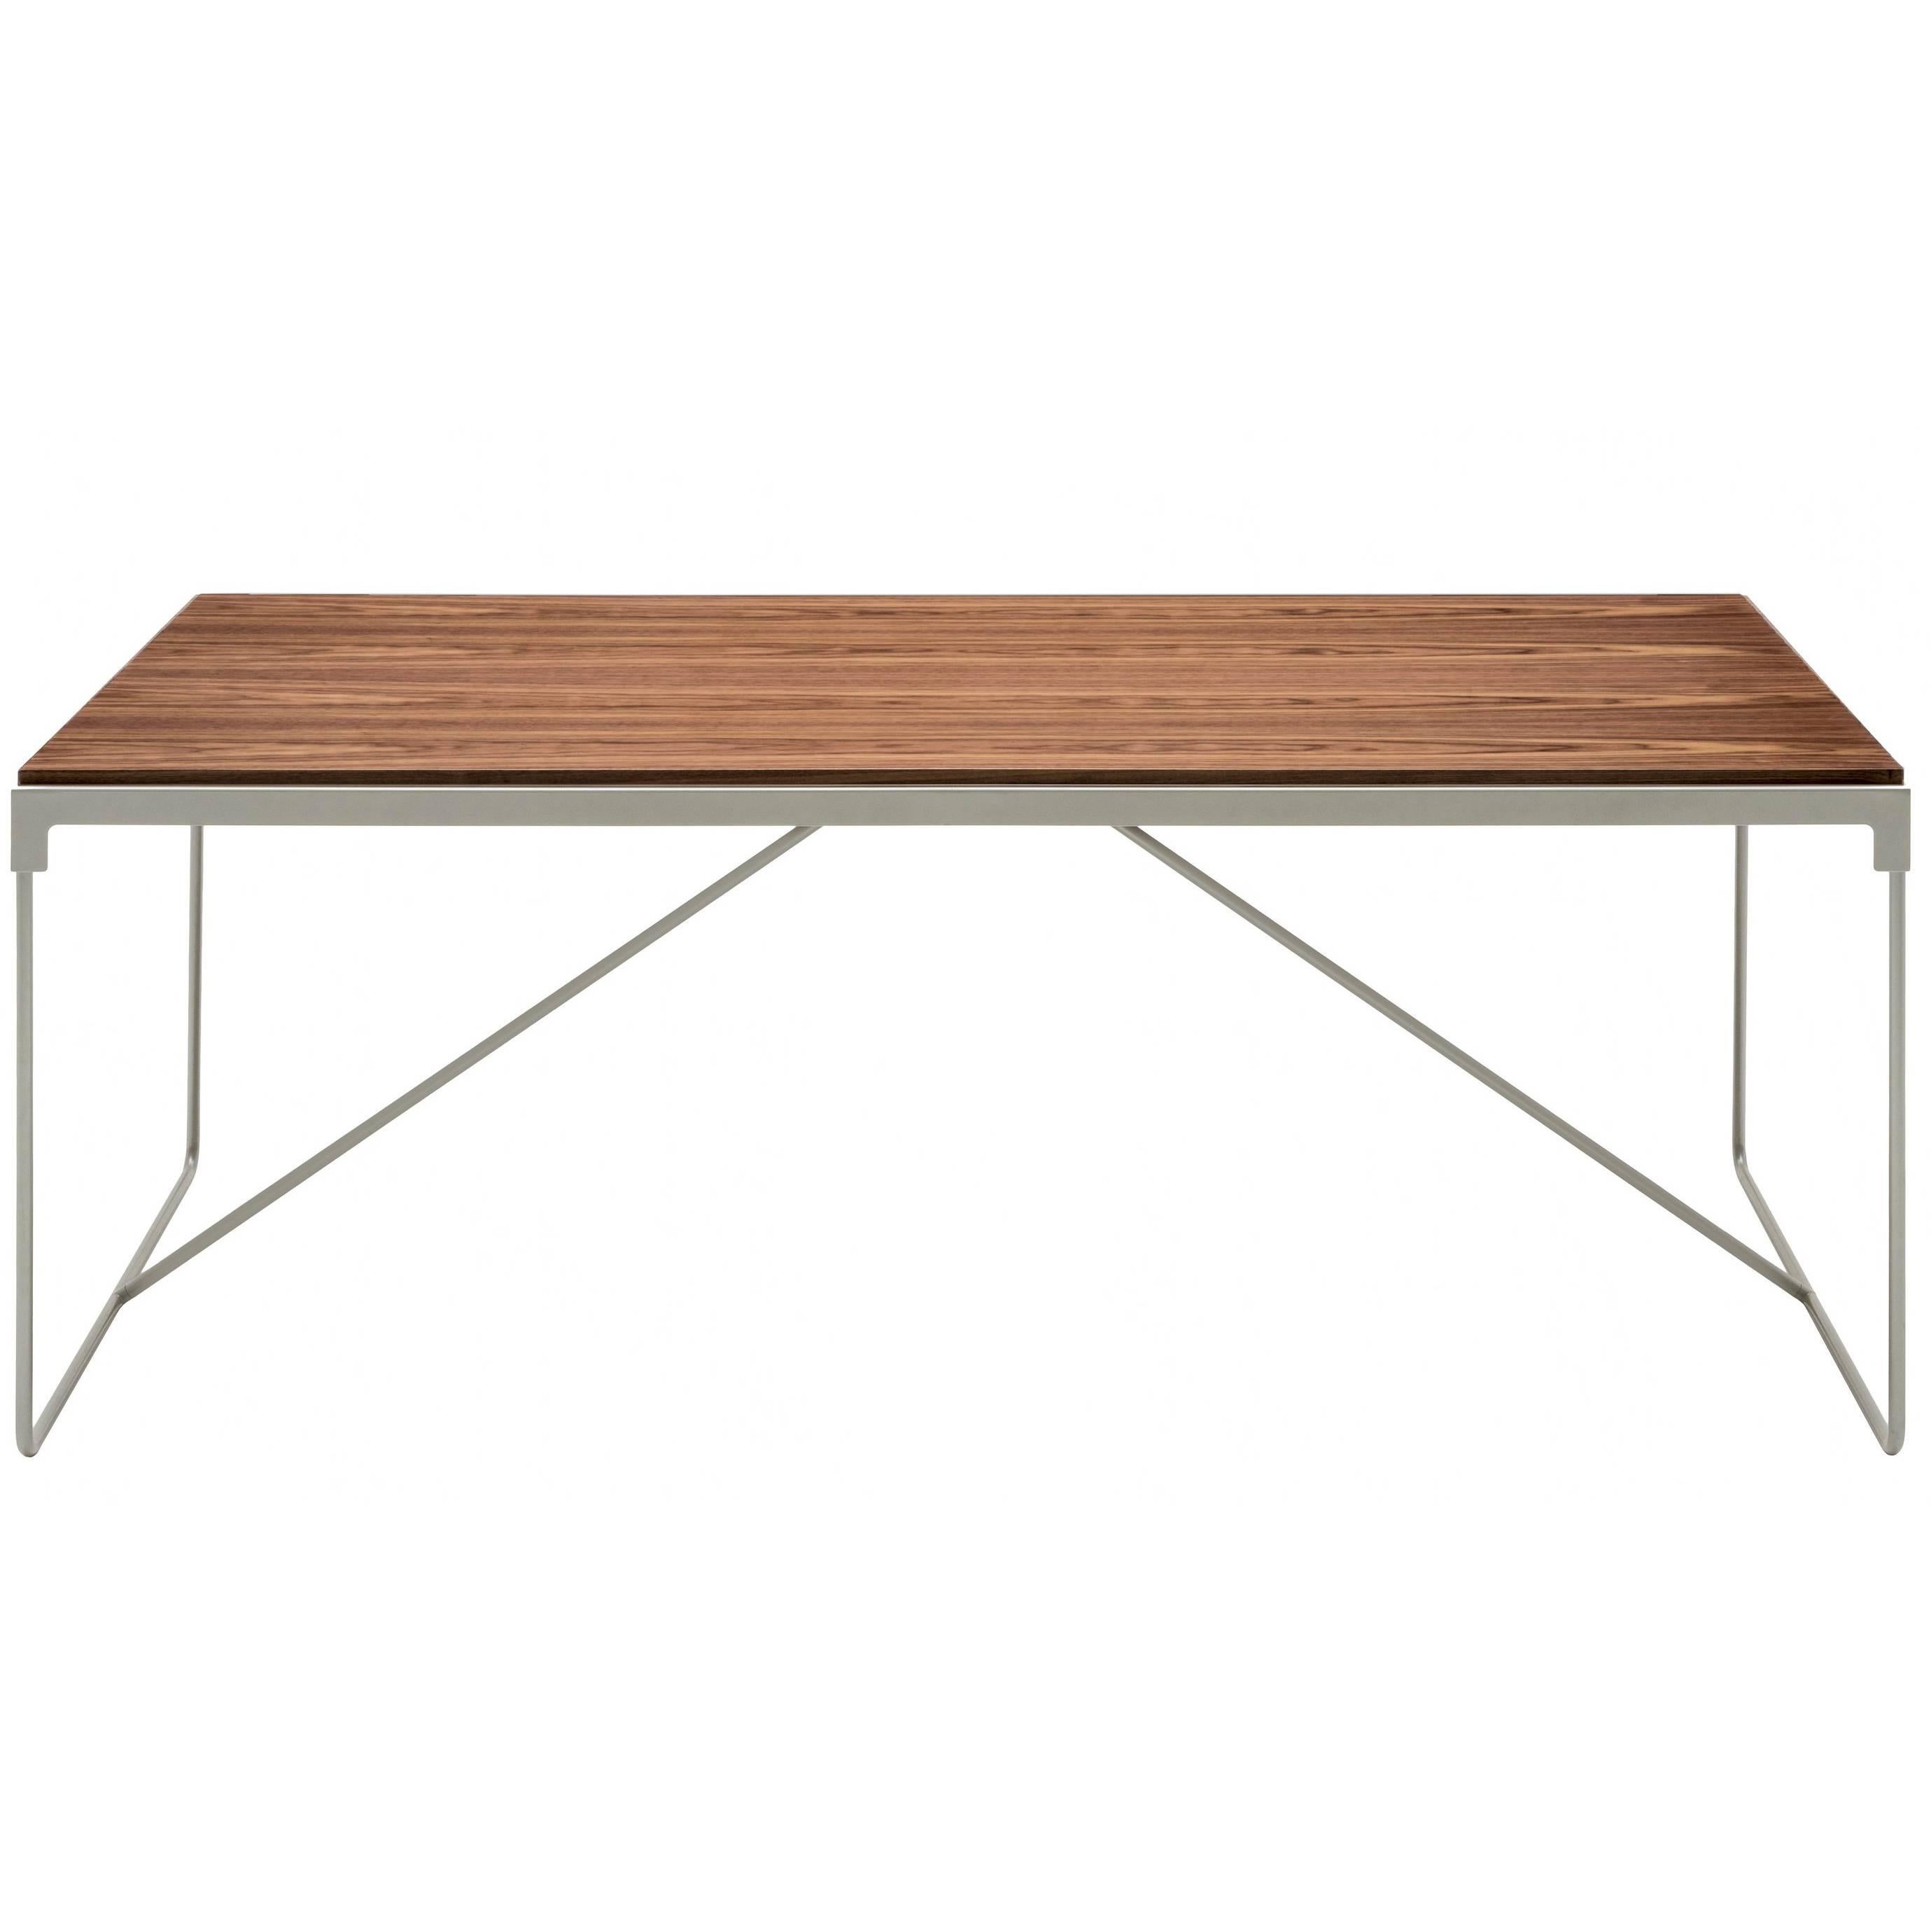 "Mingx" Canaletto Walnut Veneered and Steel Table by Konstantin Grcic for Driade For Sale